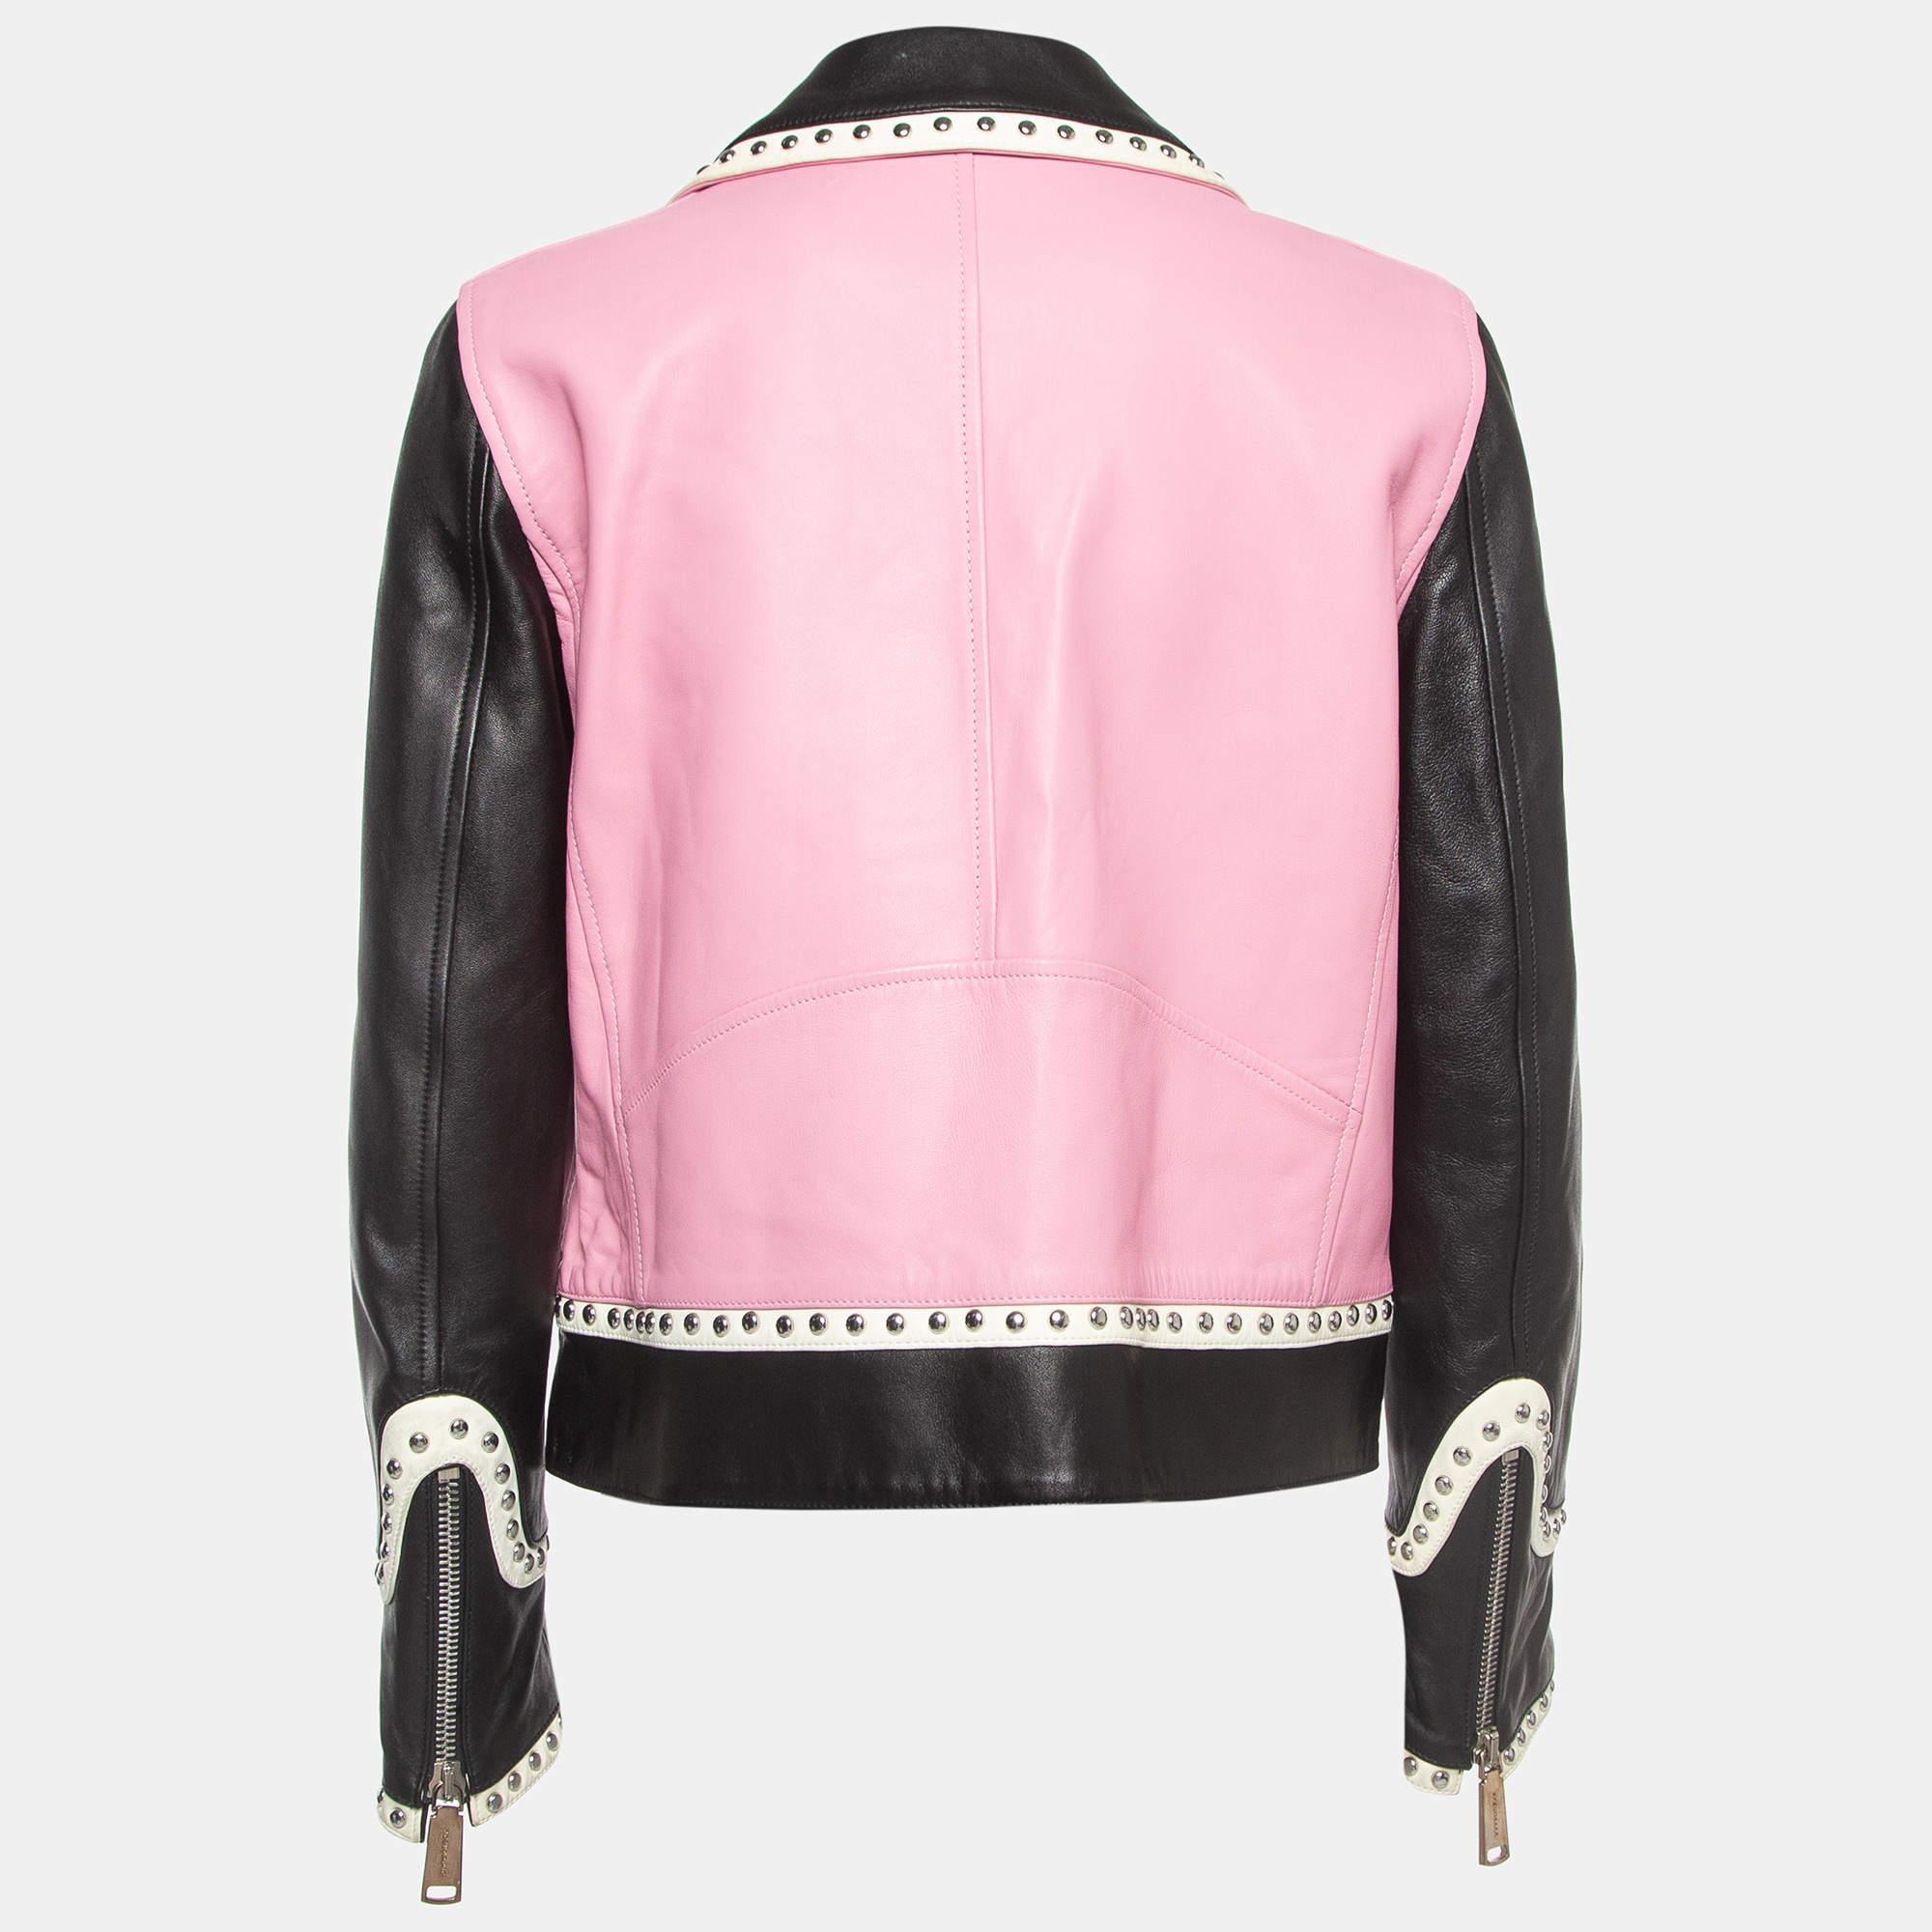 Experience luxury in every seam with this Dsquared2 leather jacket. Merging artistry and fashion, it's a piece that adds unmissable charm to your look, defining your unique style.

